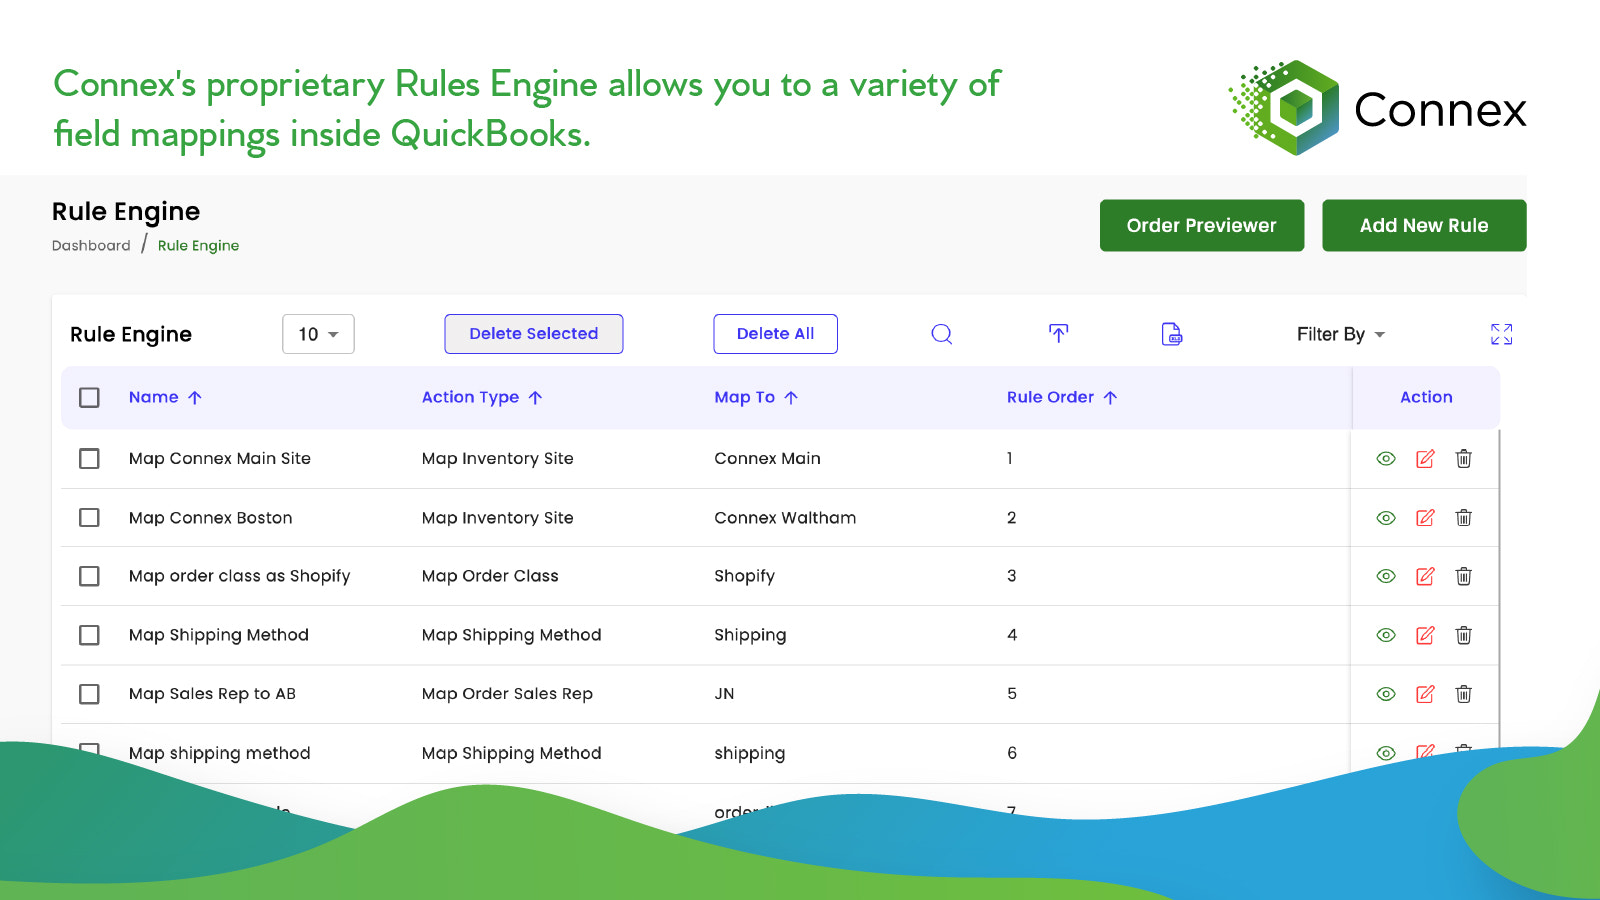 Add a variety of field mappings inside QuikBooks with the Rules 